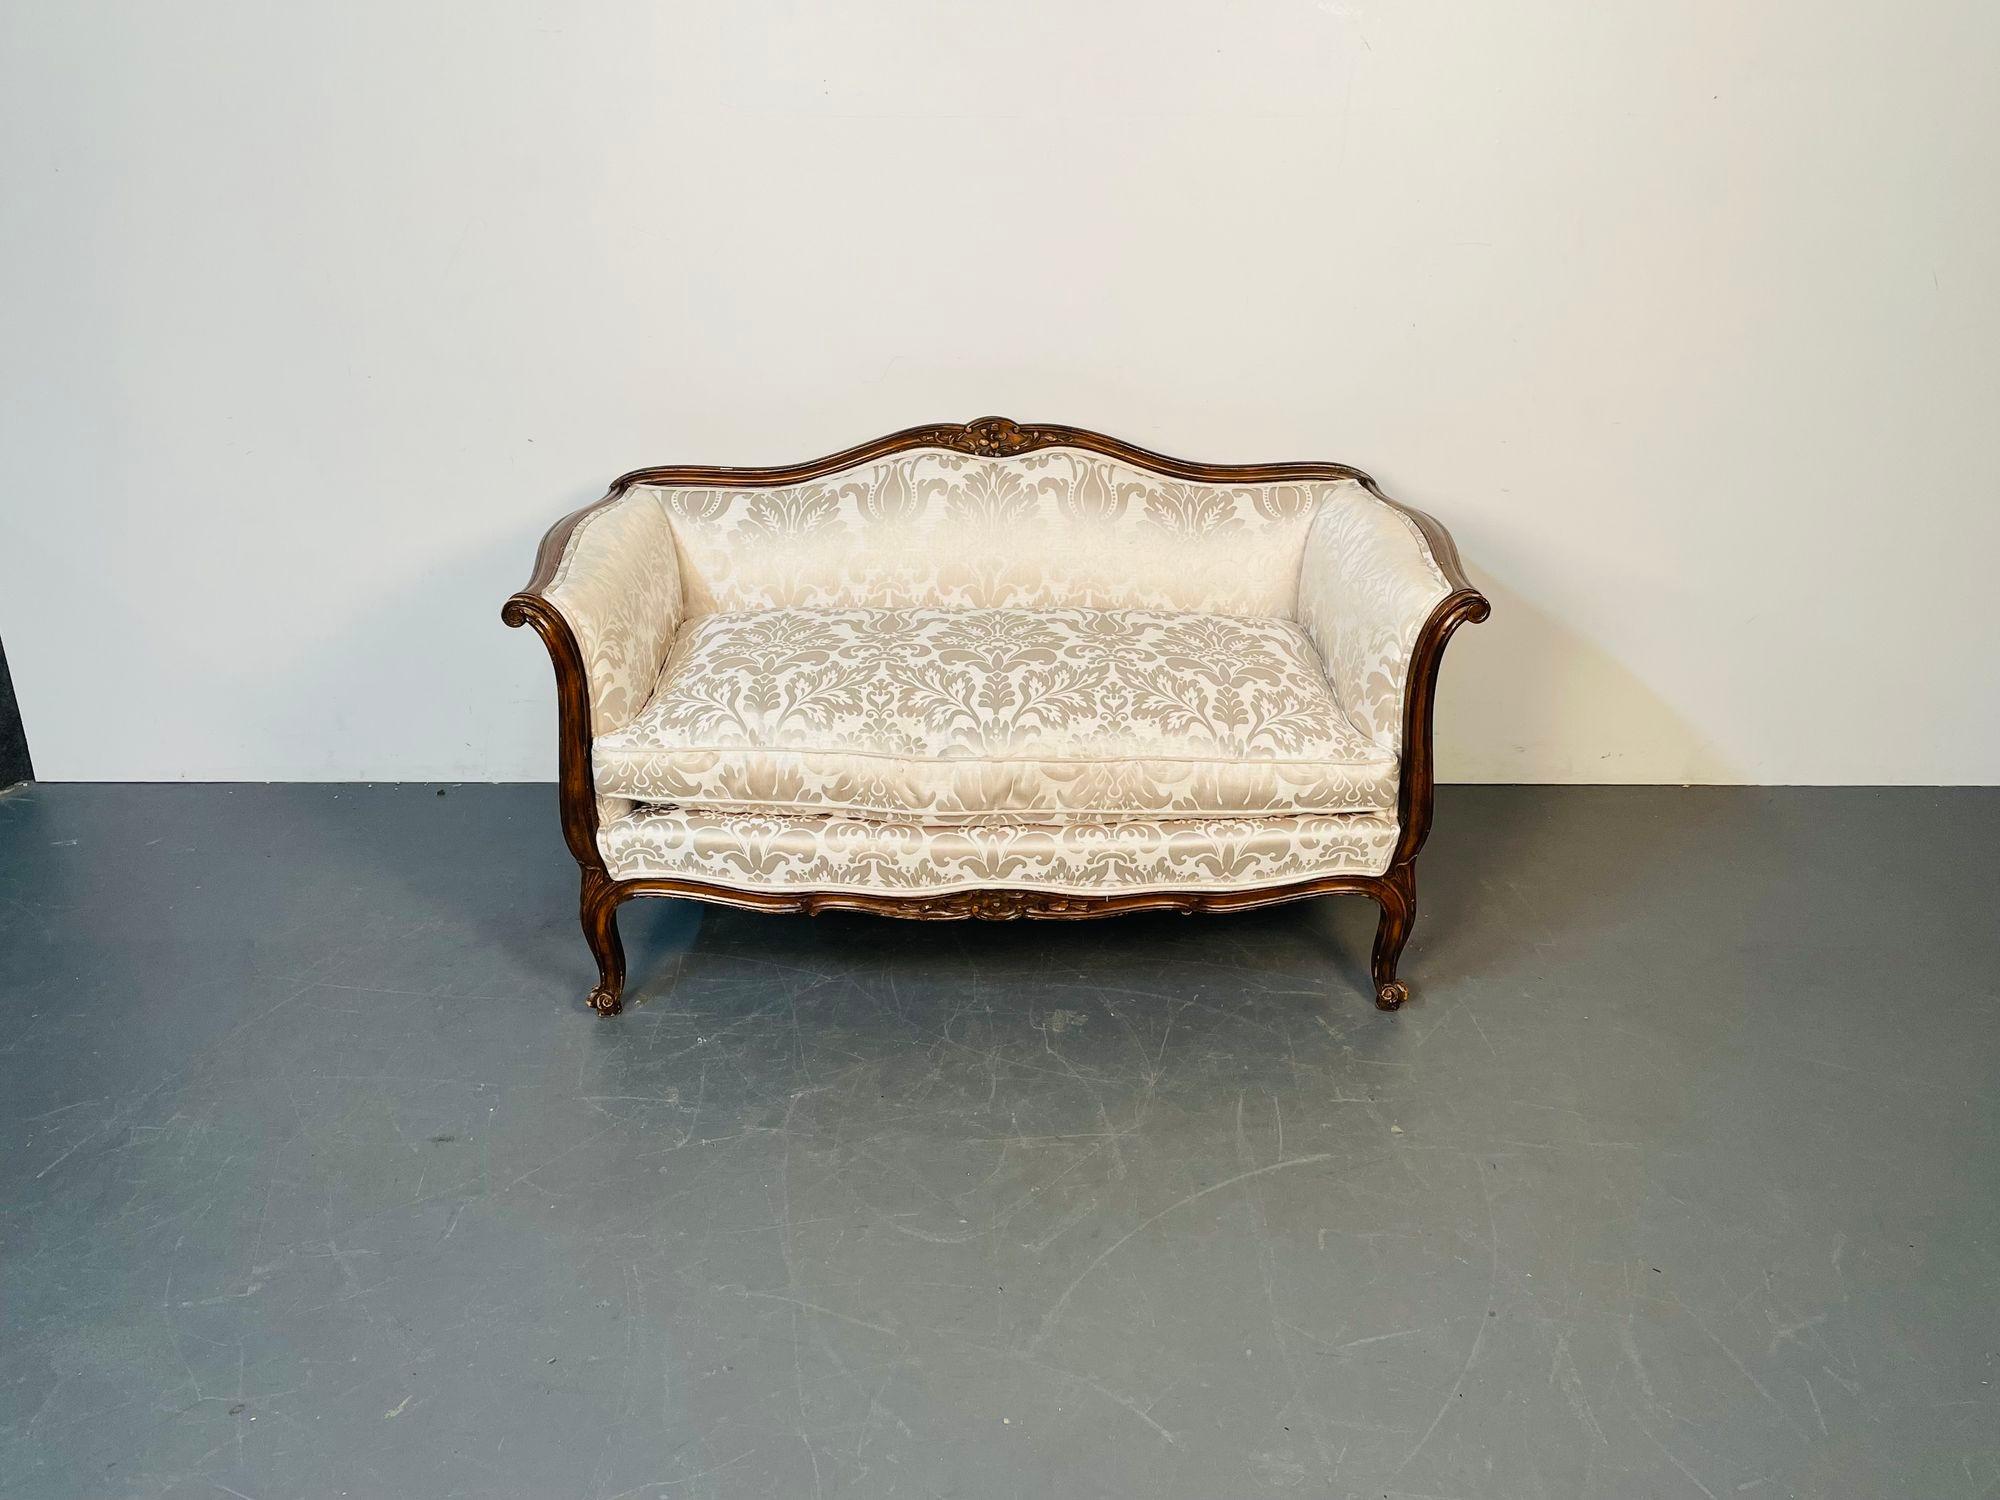 20th Century Louis XV Mahogany Carved Settee, Canape / Sofa, Floral Silk Upholstery For Sale